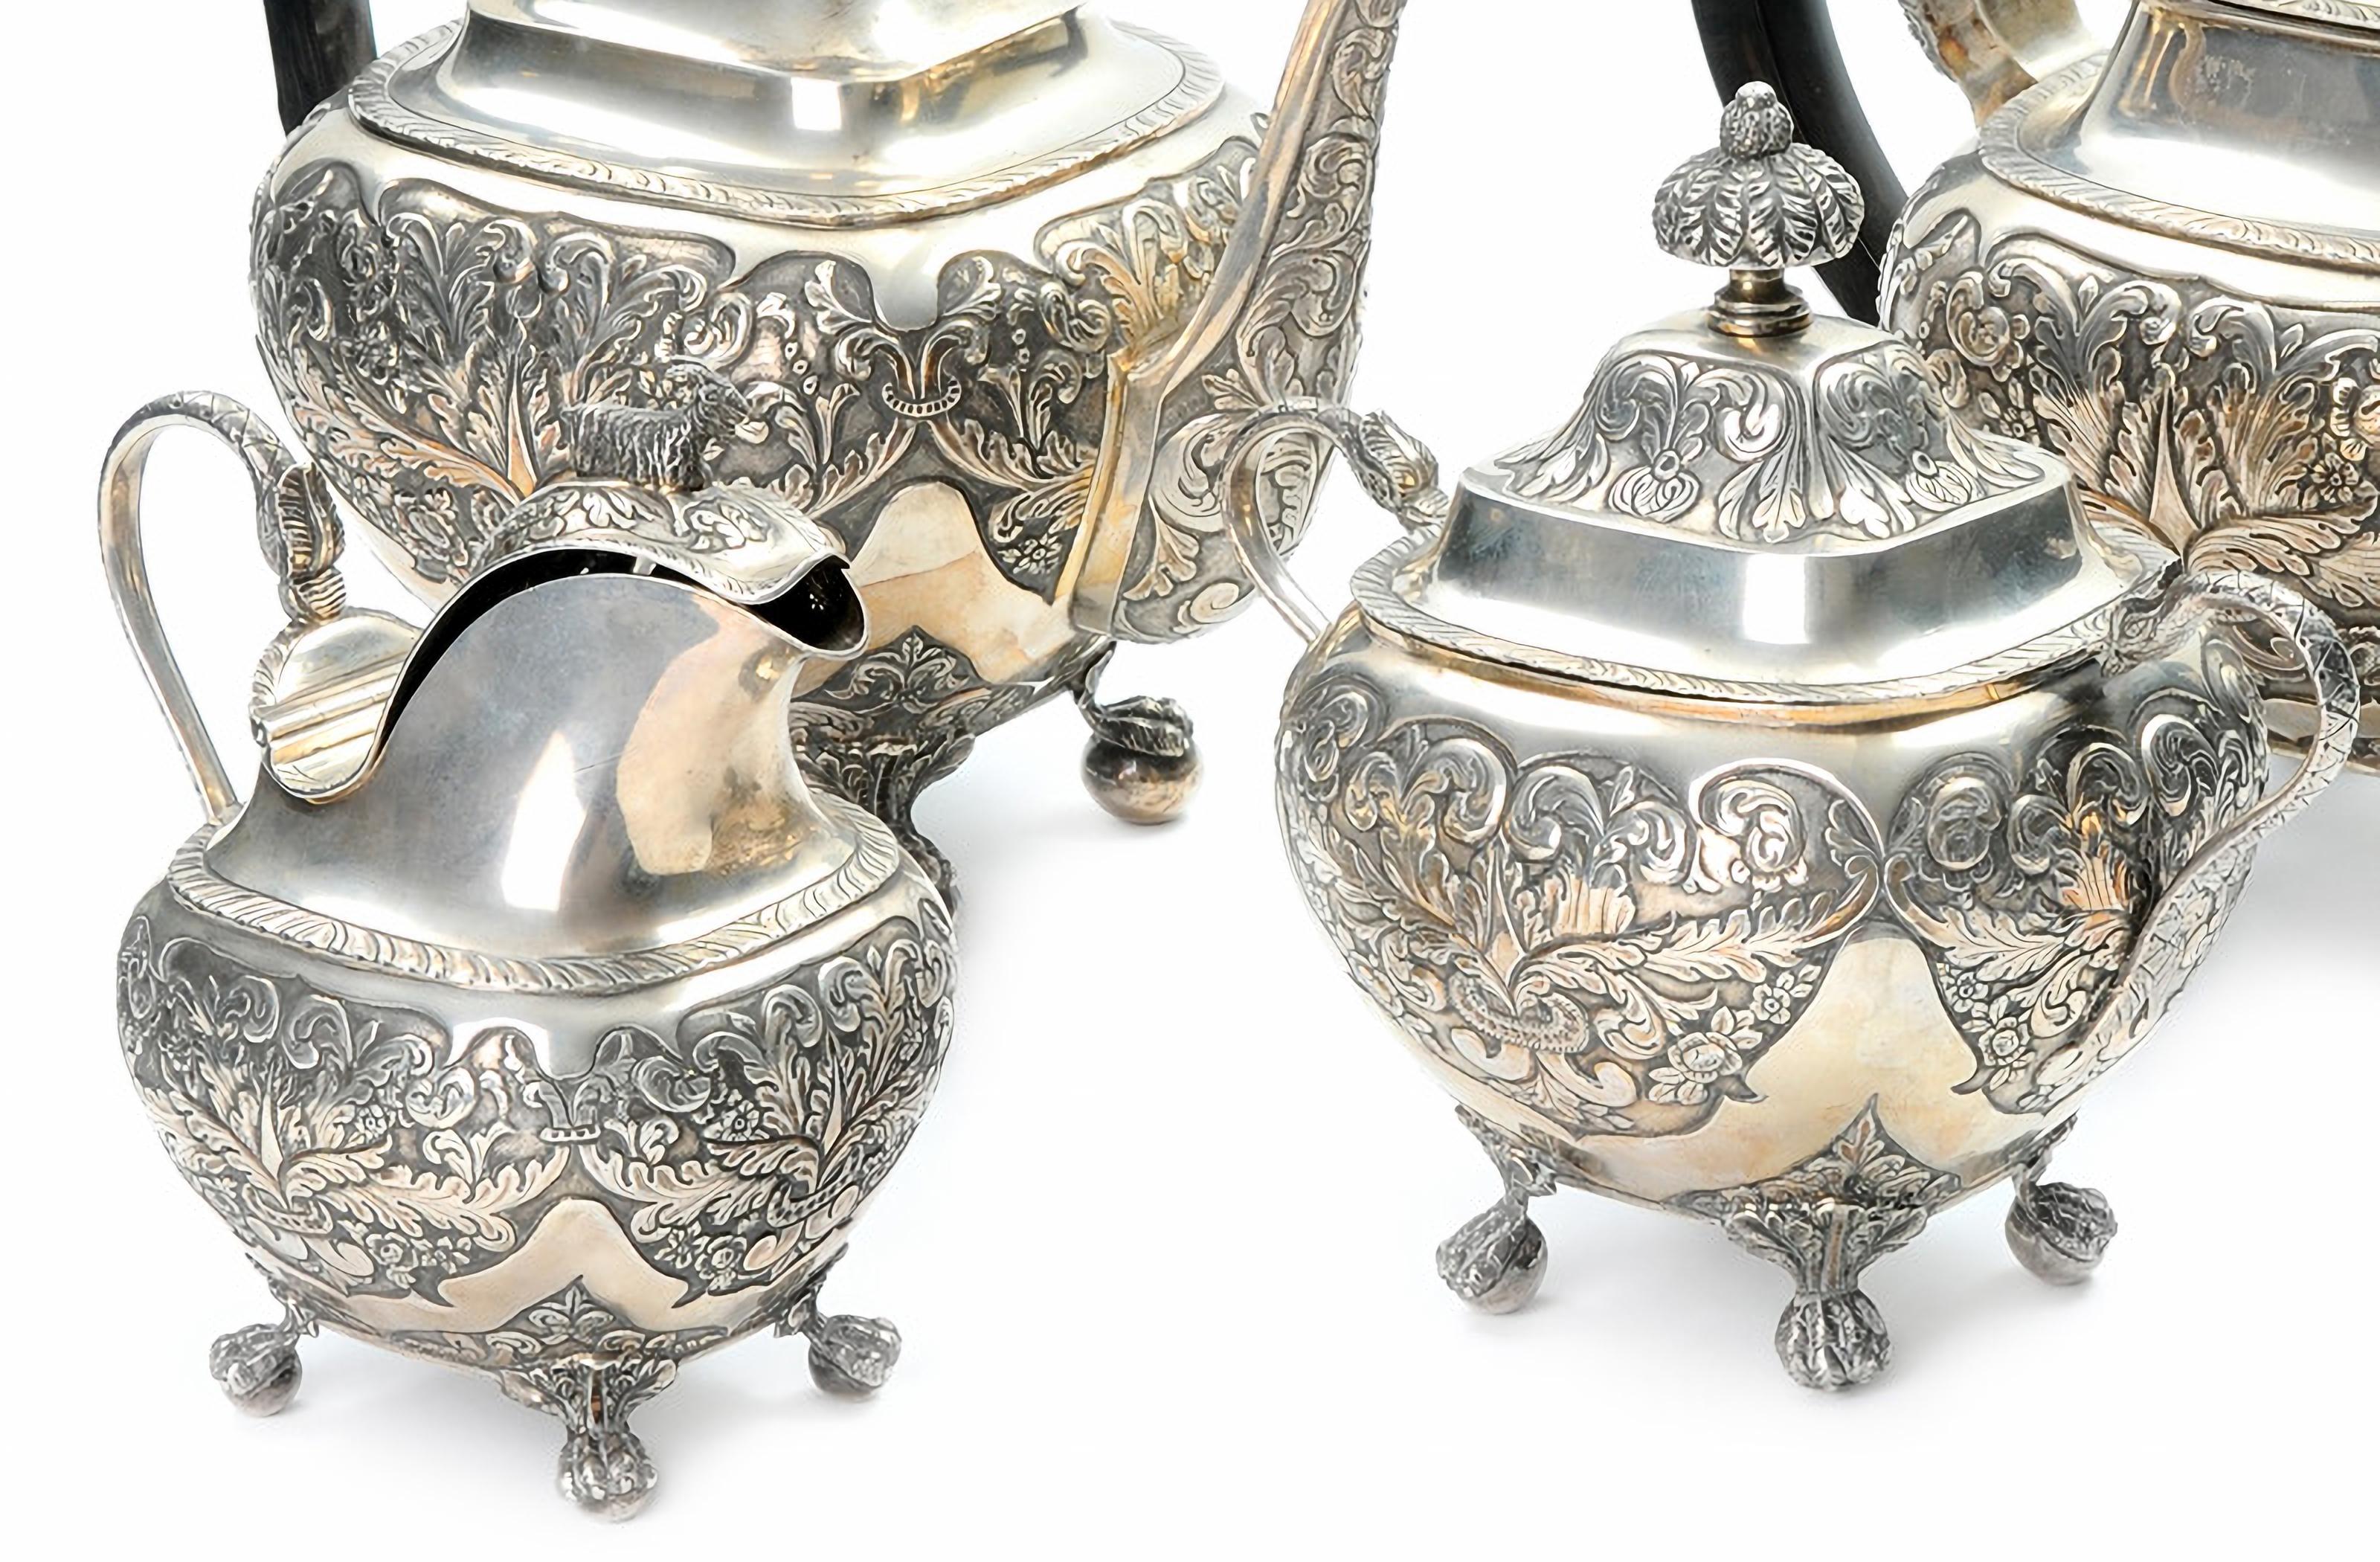 Portuguese silver tea and coffee service
19th Century
composed of, teapot, coffee maker, milk jug and sugar bowl. Body profusely decorated with floral motifs. Handles in rosewood. Lisbon assay mark (L-41) in use from 1843 to 1870. Unidentified